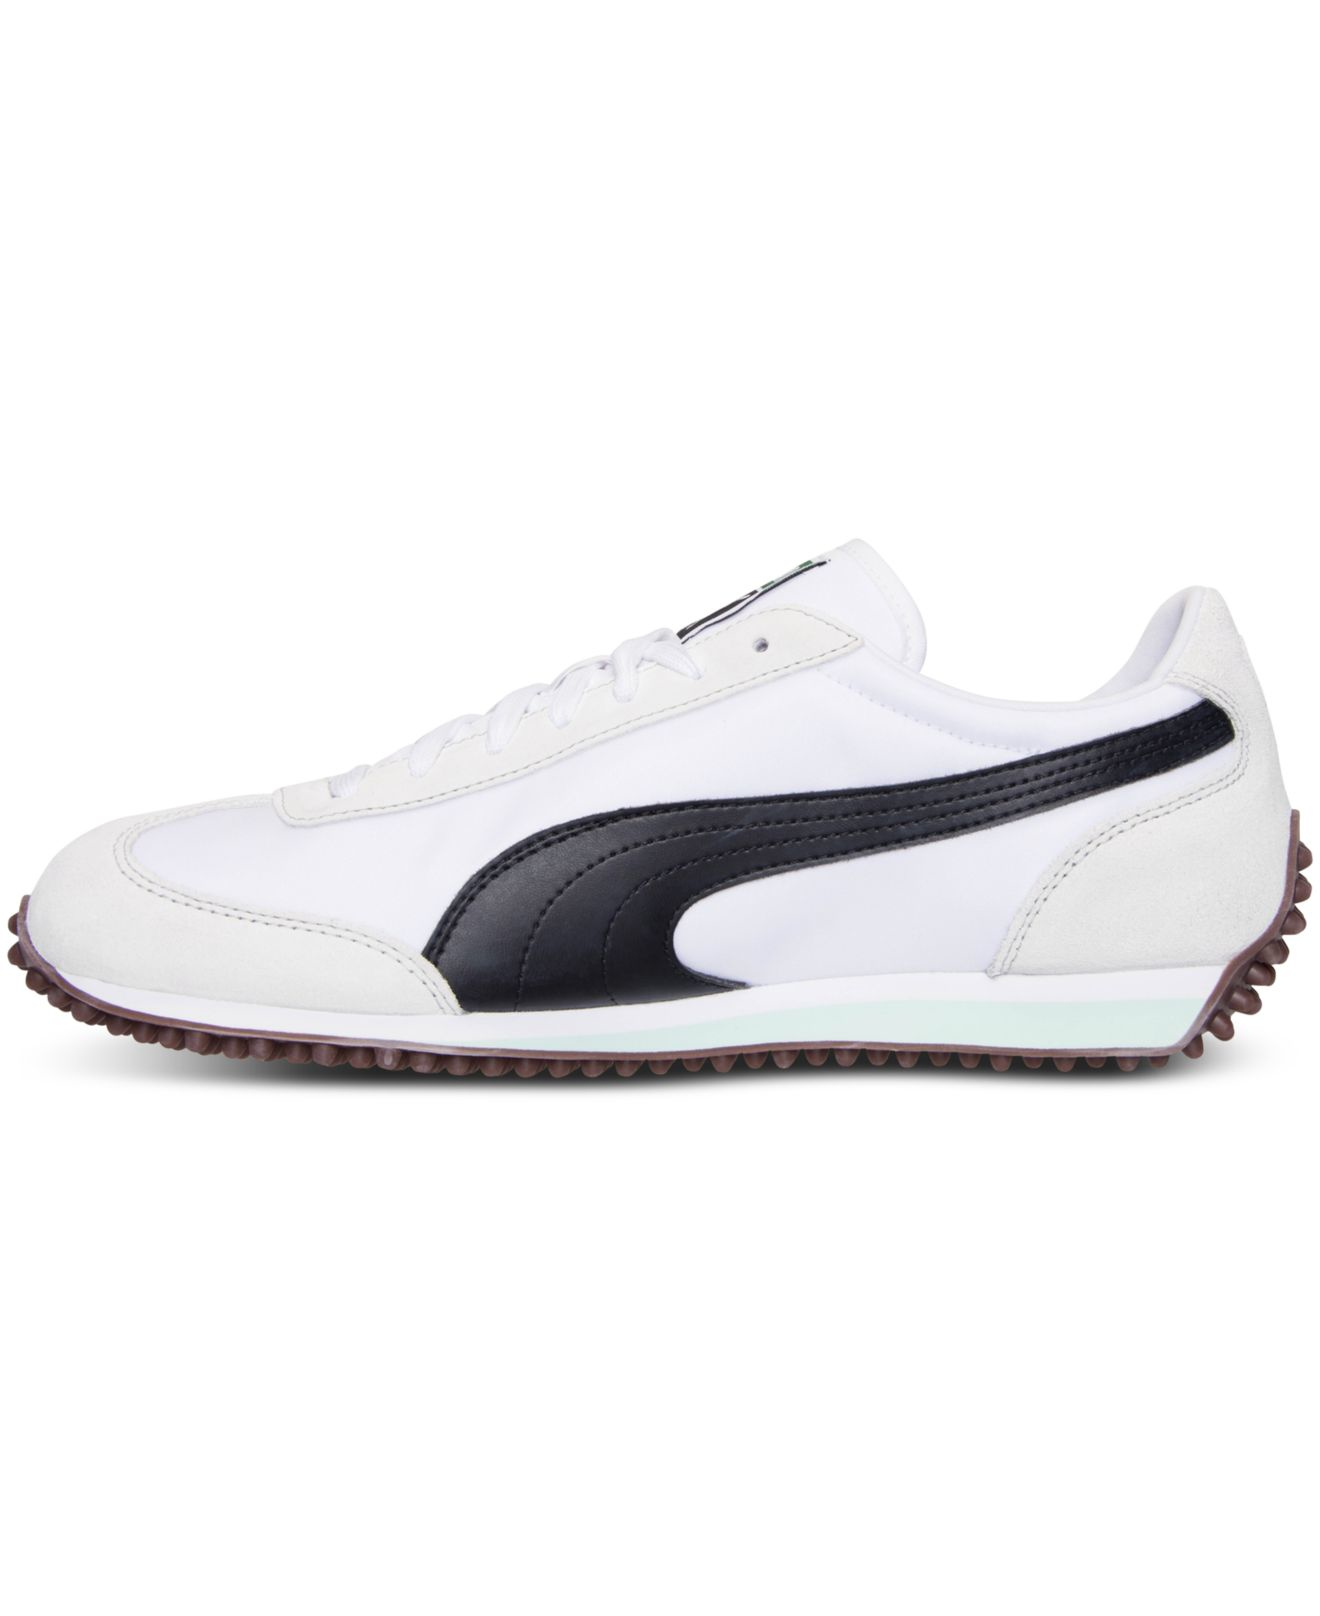 Lyst - Puma Men's Whirlwind Classics Casual Sneakers From Finish Line ...